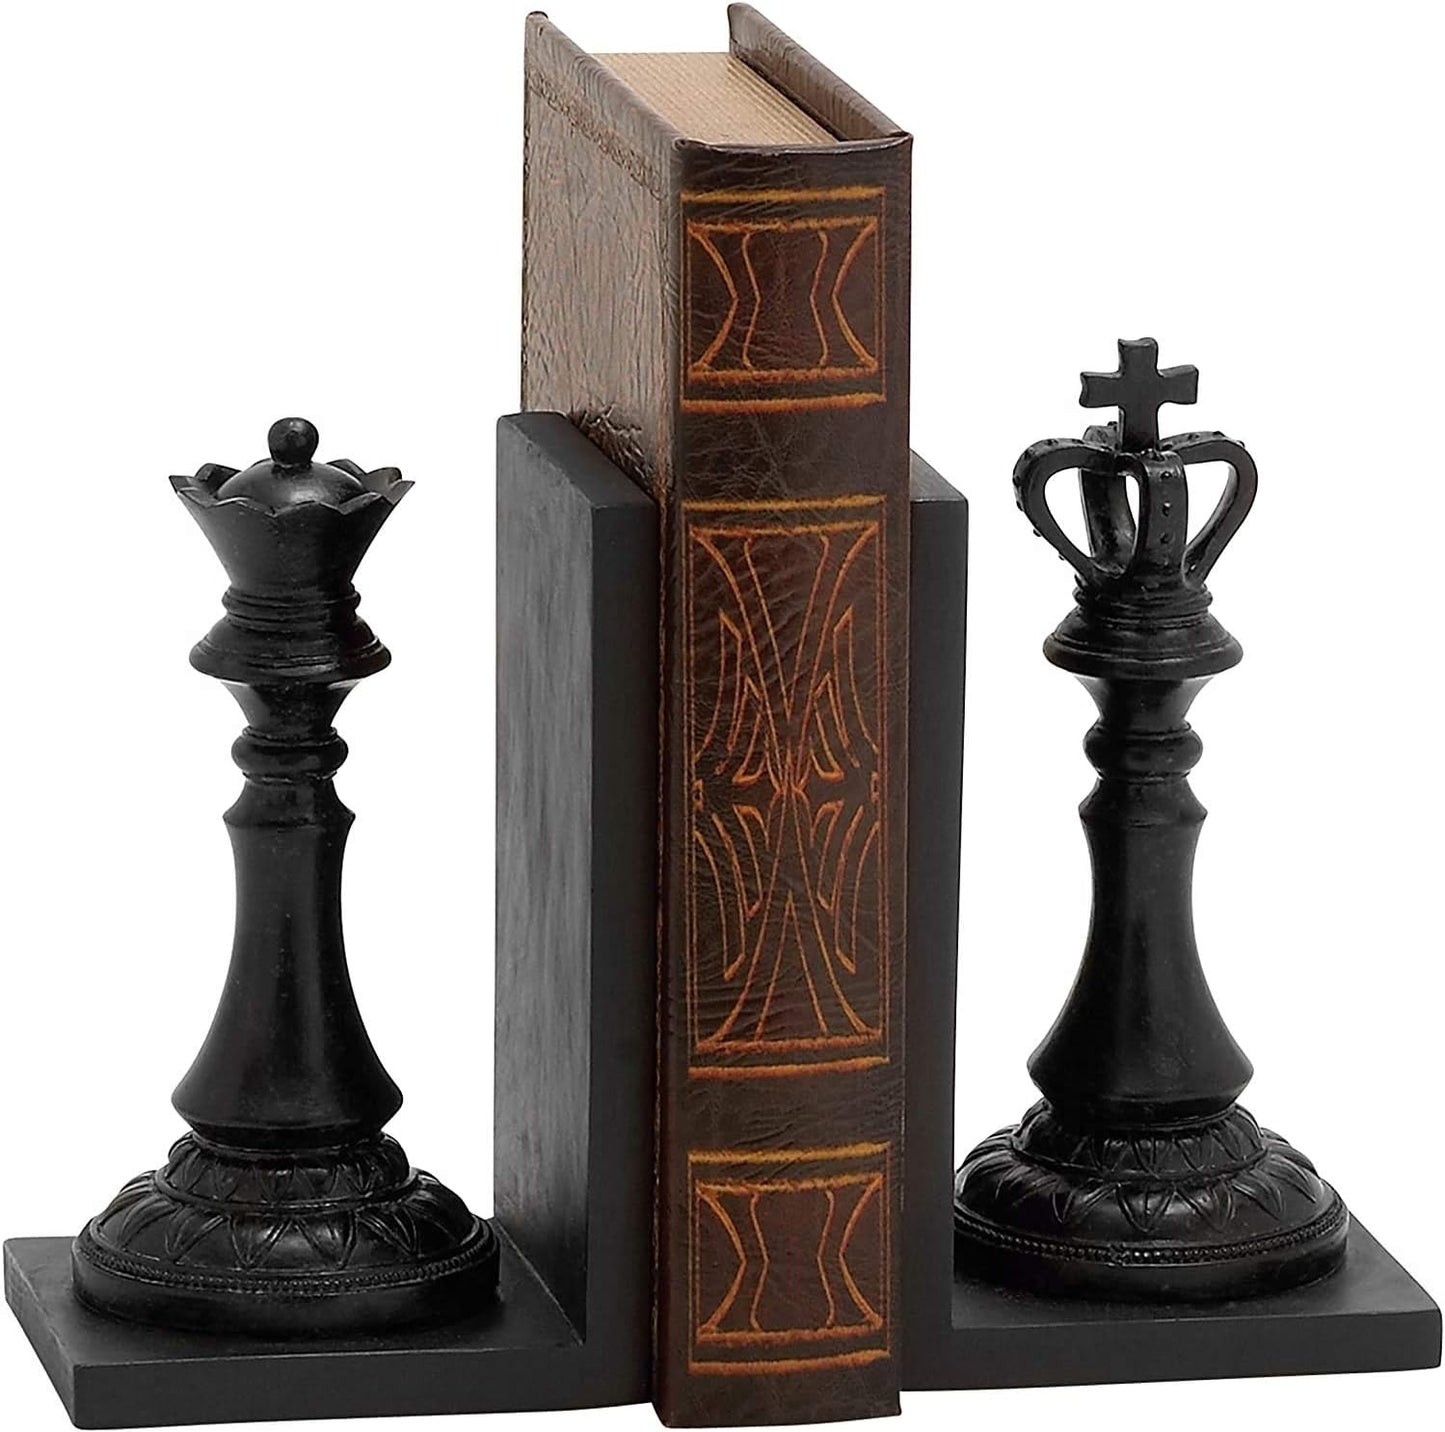 29745 Chess King and Queen Decorative Bookend Royal Exquisite Vintage Retro Book Ends Shelf Organizers Books Stopper Black Statues Sculpture 7 Inch